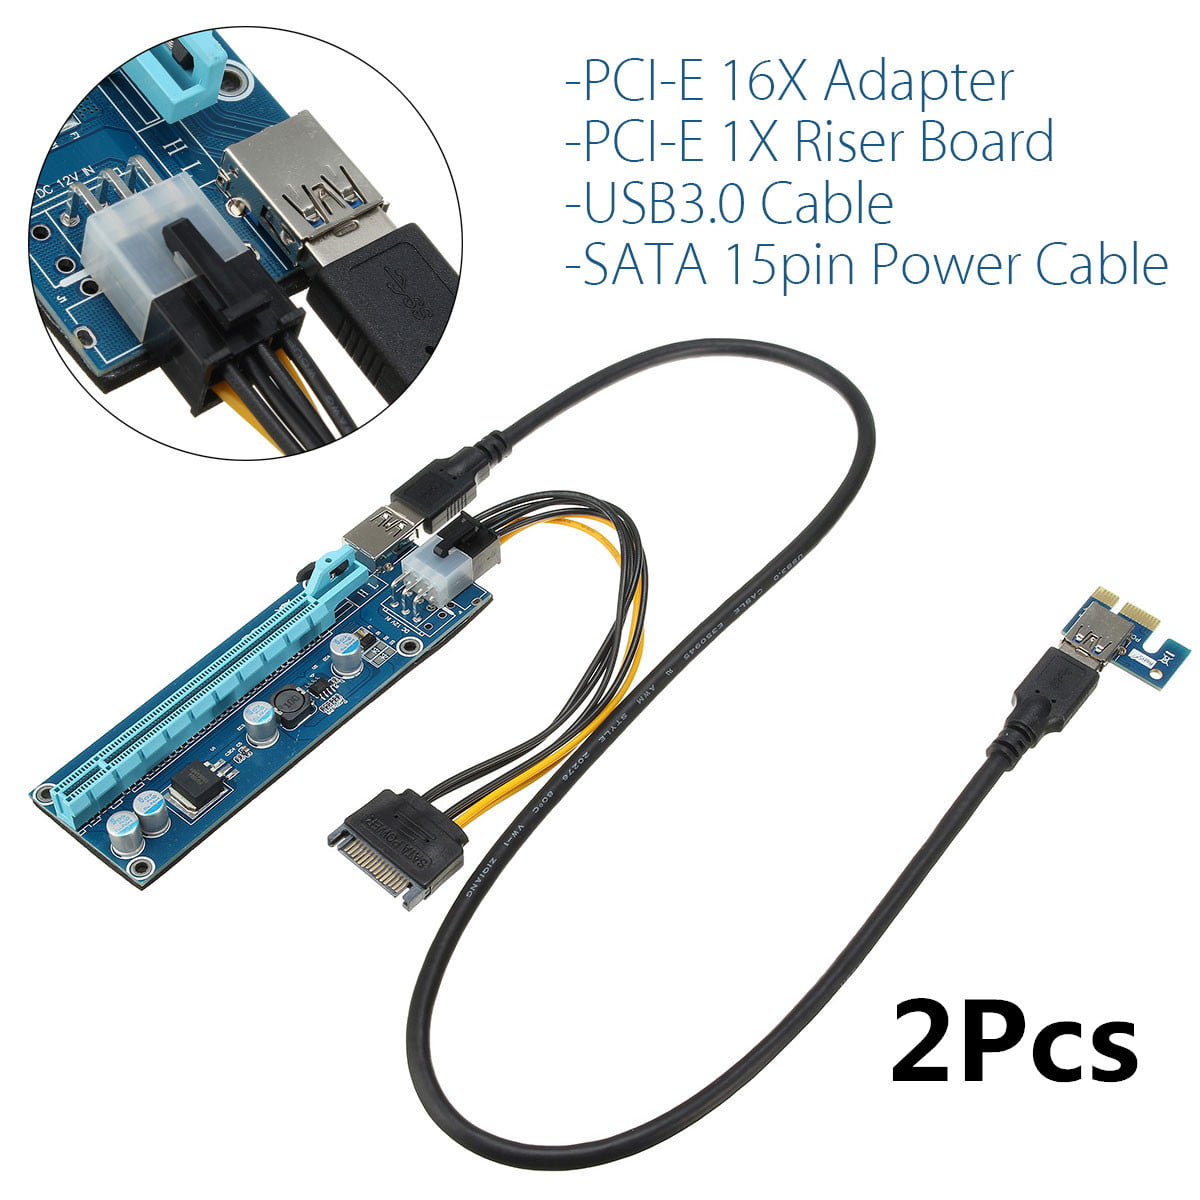 Cables PCI-E Express 1x to 16x 6PIN Mining Extender Riser Card Adapter with USB 3.0 Cable 2018 Cables Cable Length: 0.6m, Color: Black 